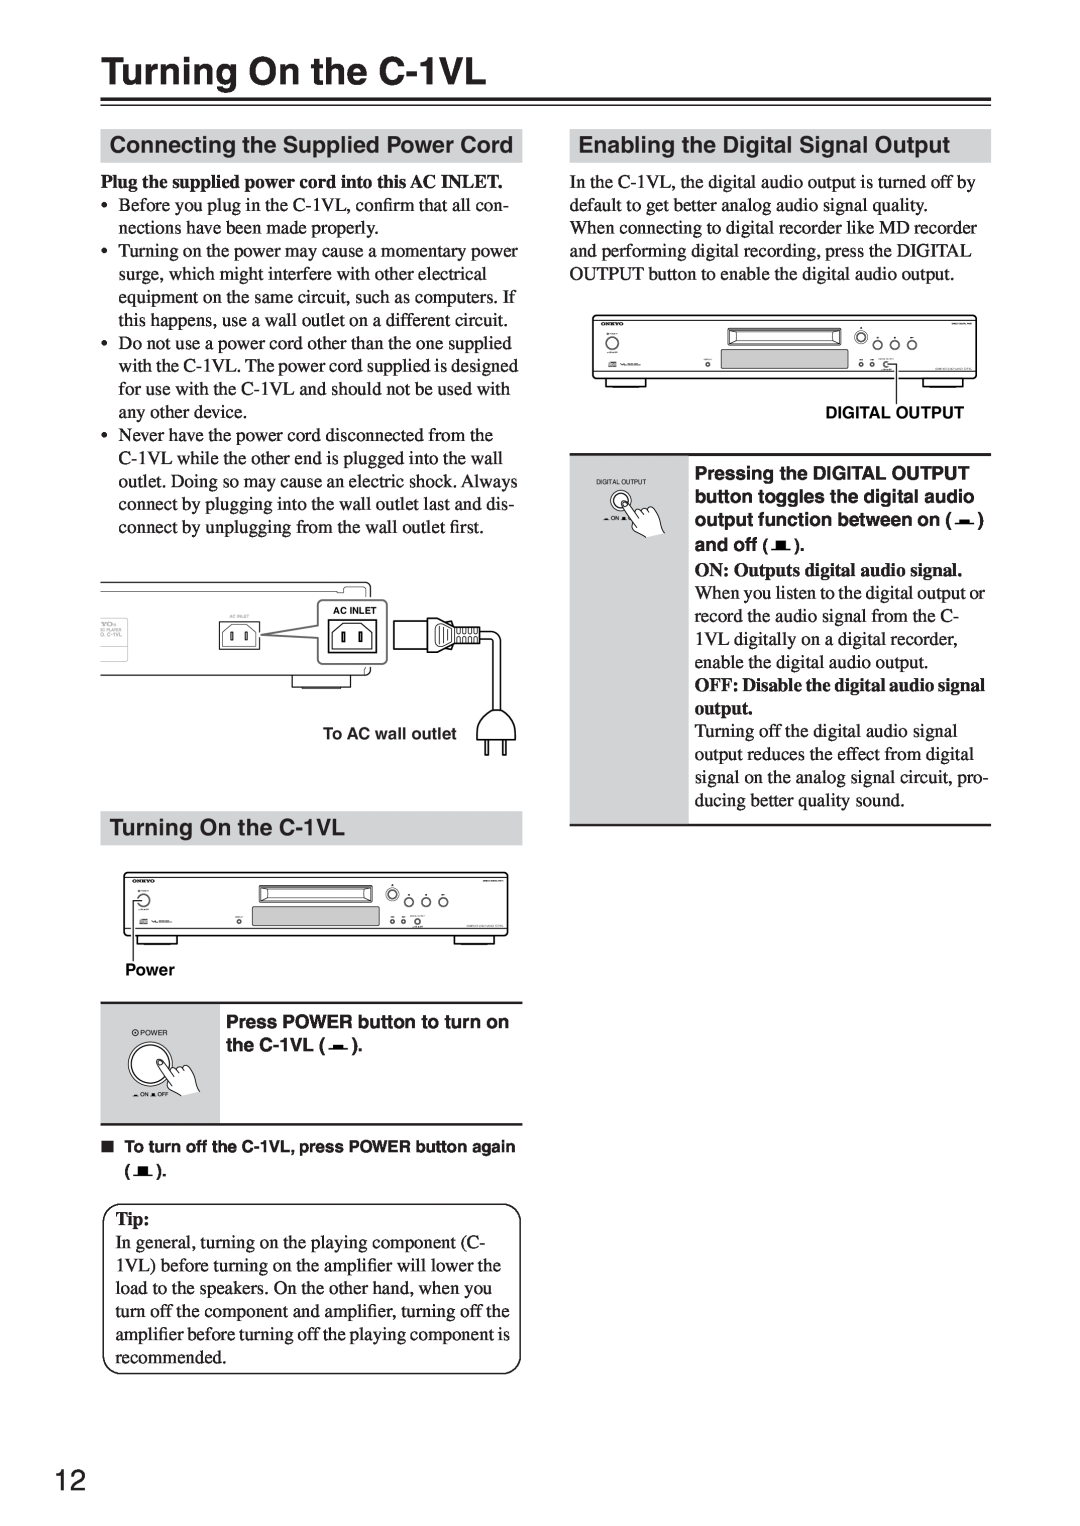 Onkyo instruction manual Turning On the C-1VL, Connecting the Supplied Power Cord, Enabling the Digital Signal Output 